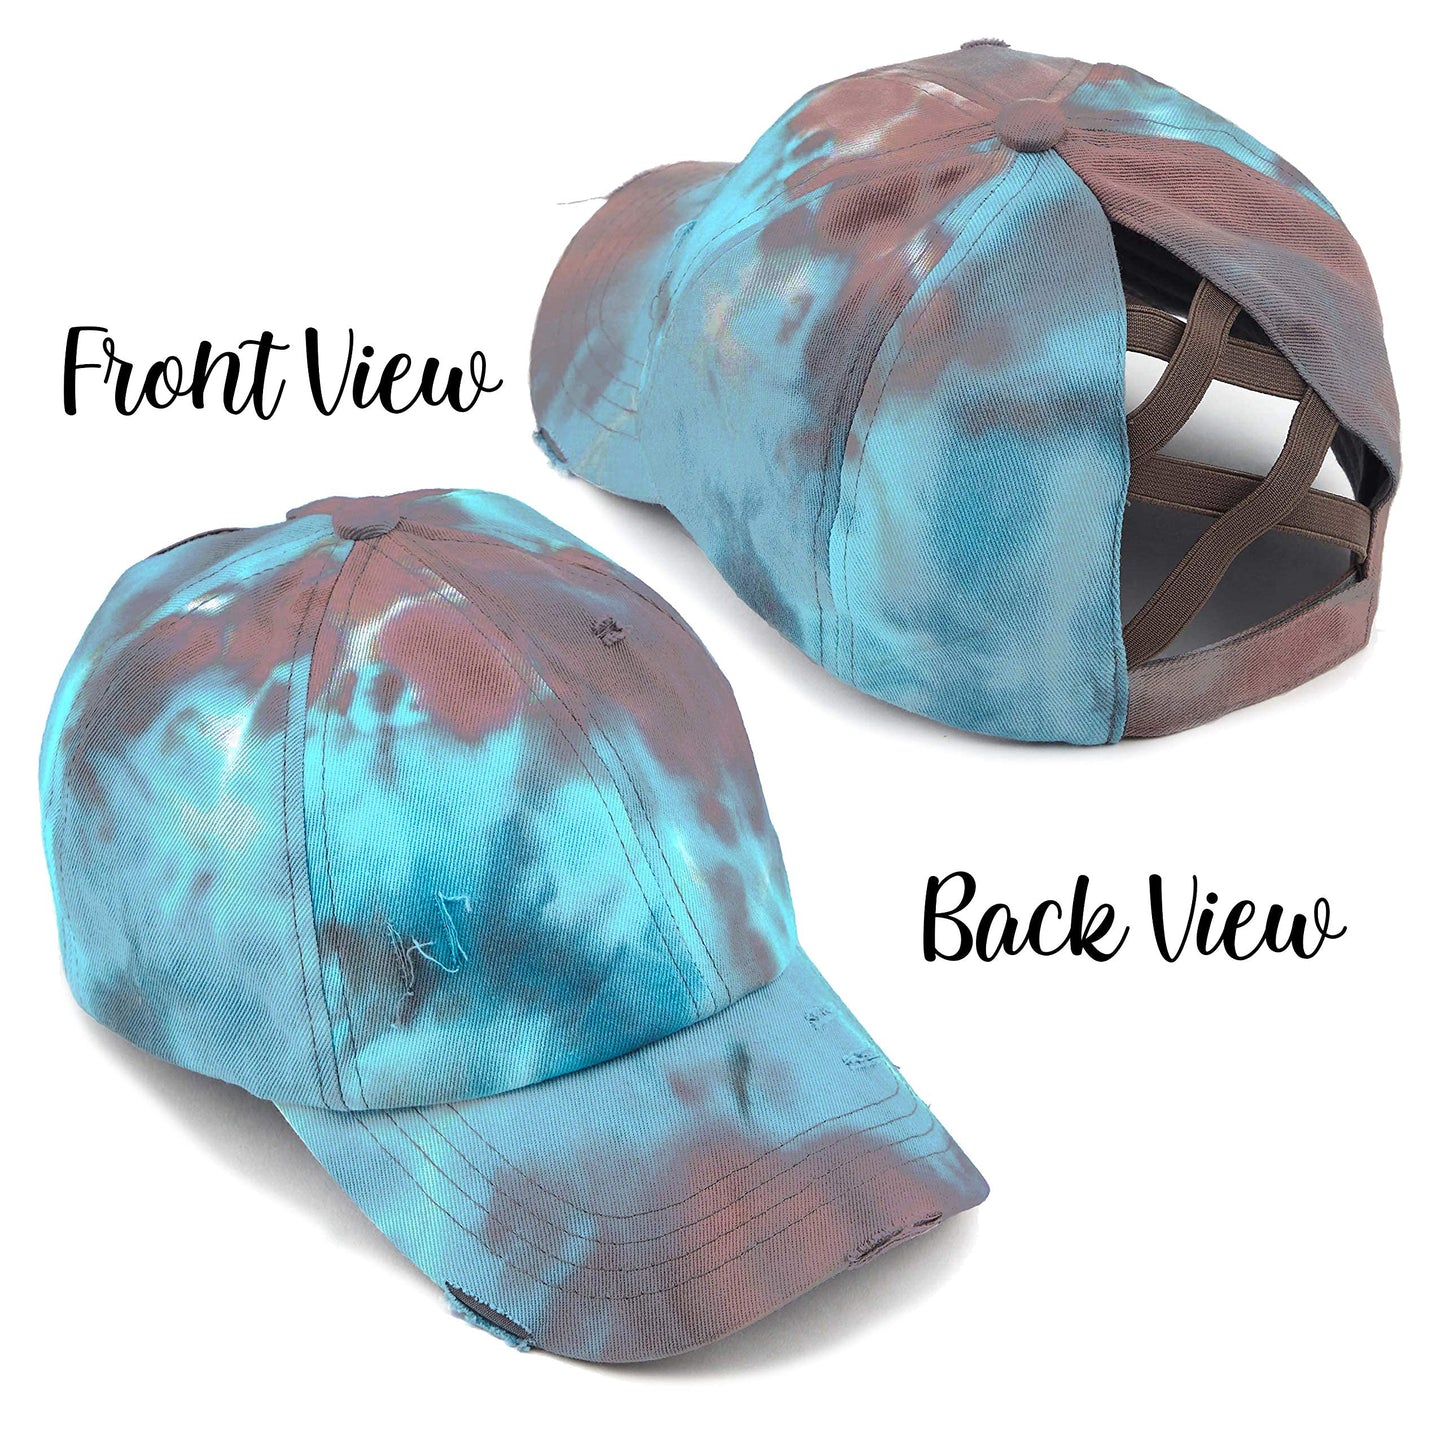 Tie Dye Criss Cross Ponytail Hat by Funky Junque